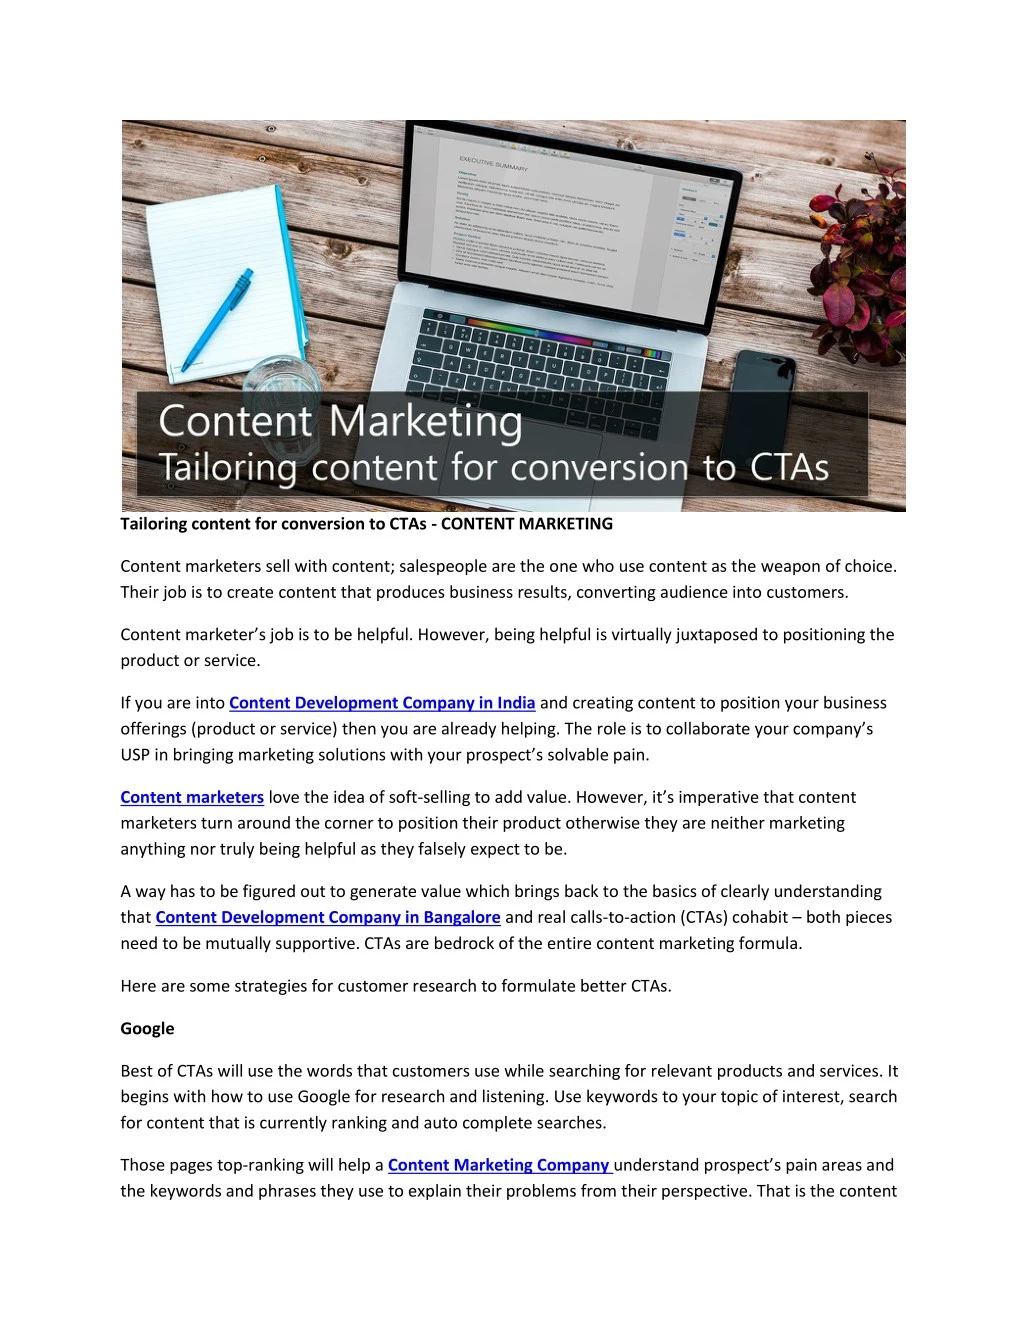 tailoring content for conversion to ctas content